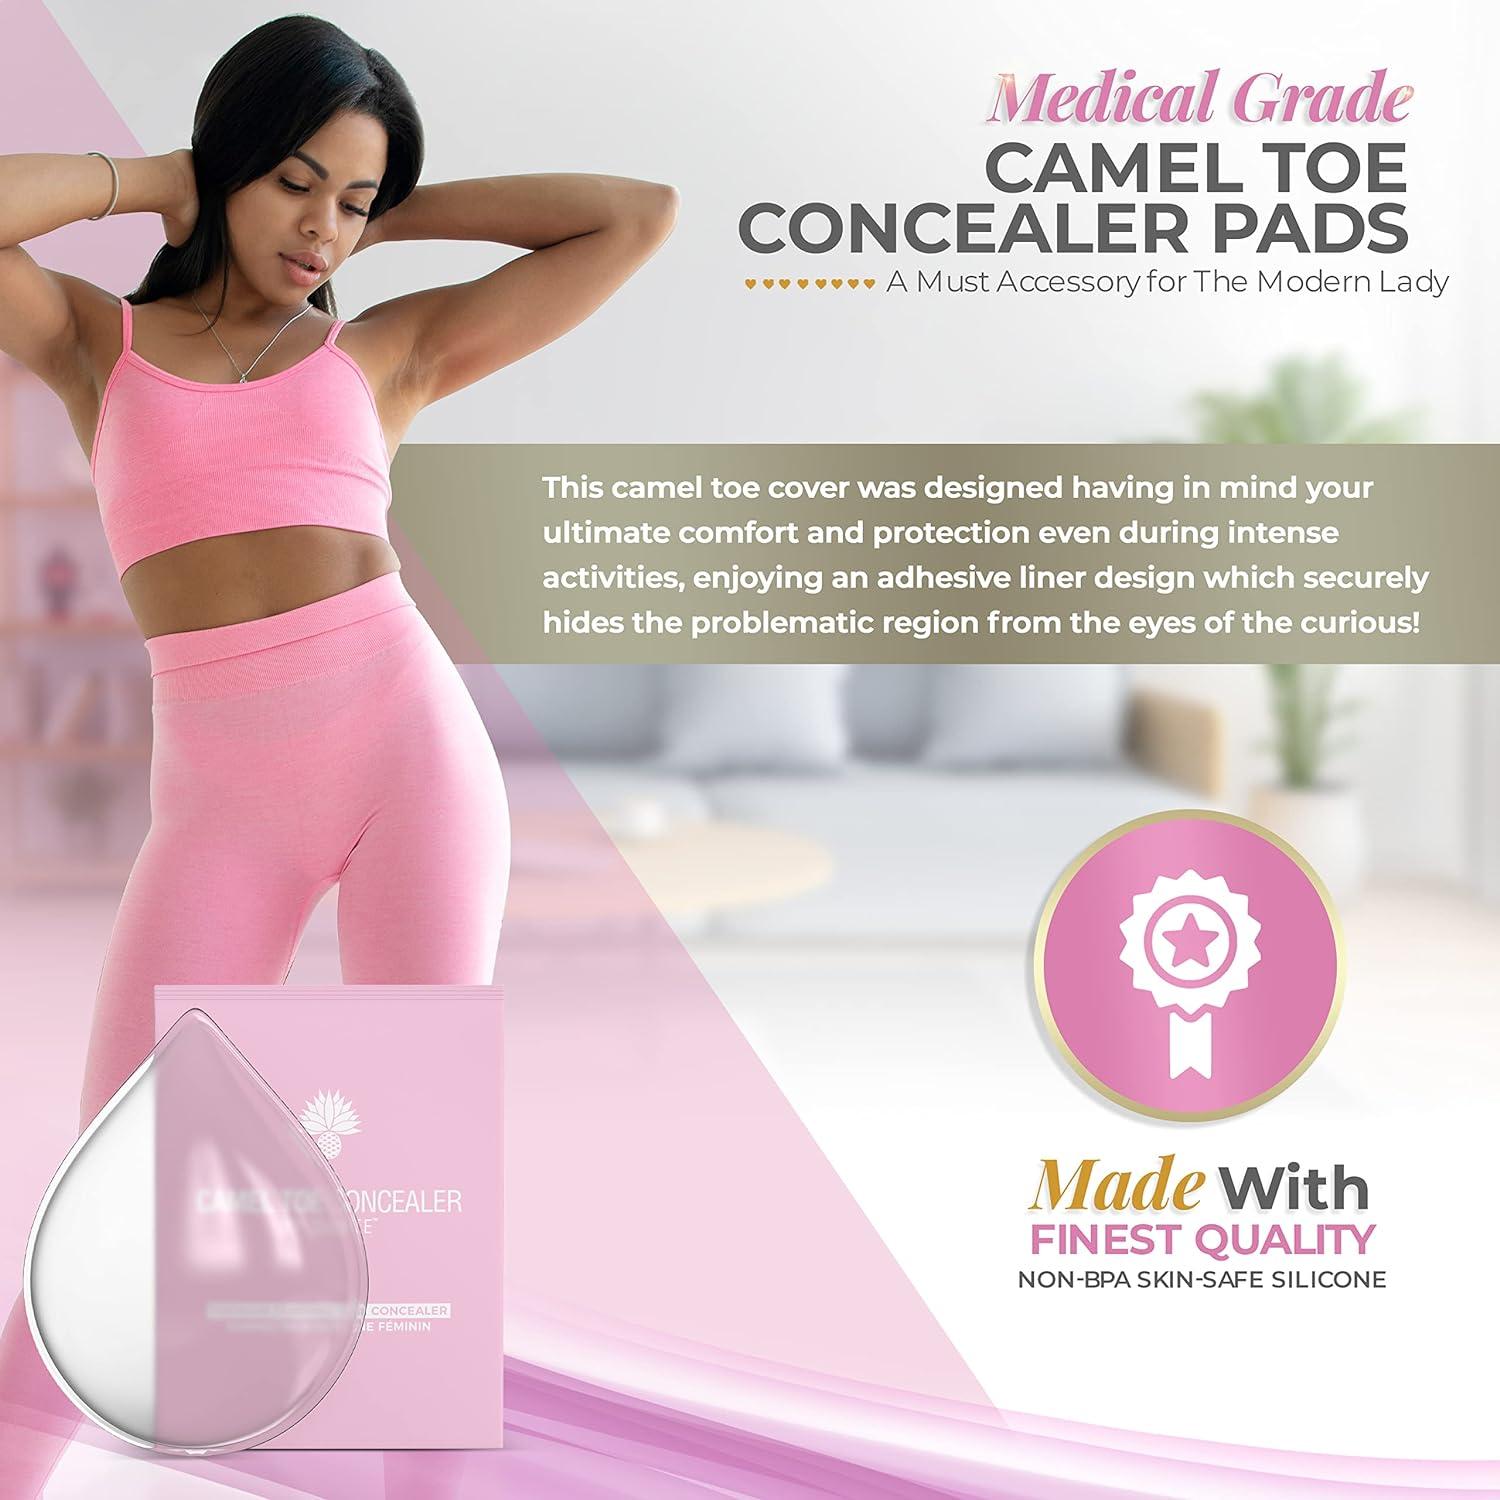 10 Simple Techniques For Camel Toe Covers